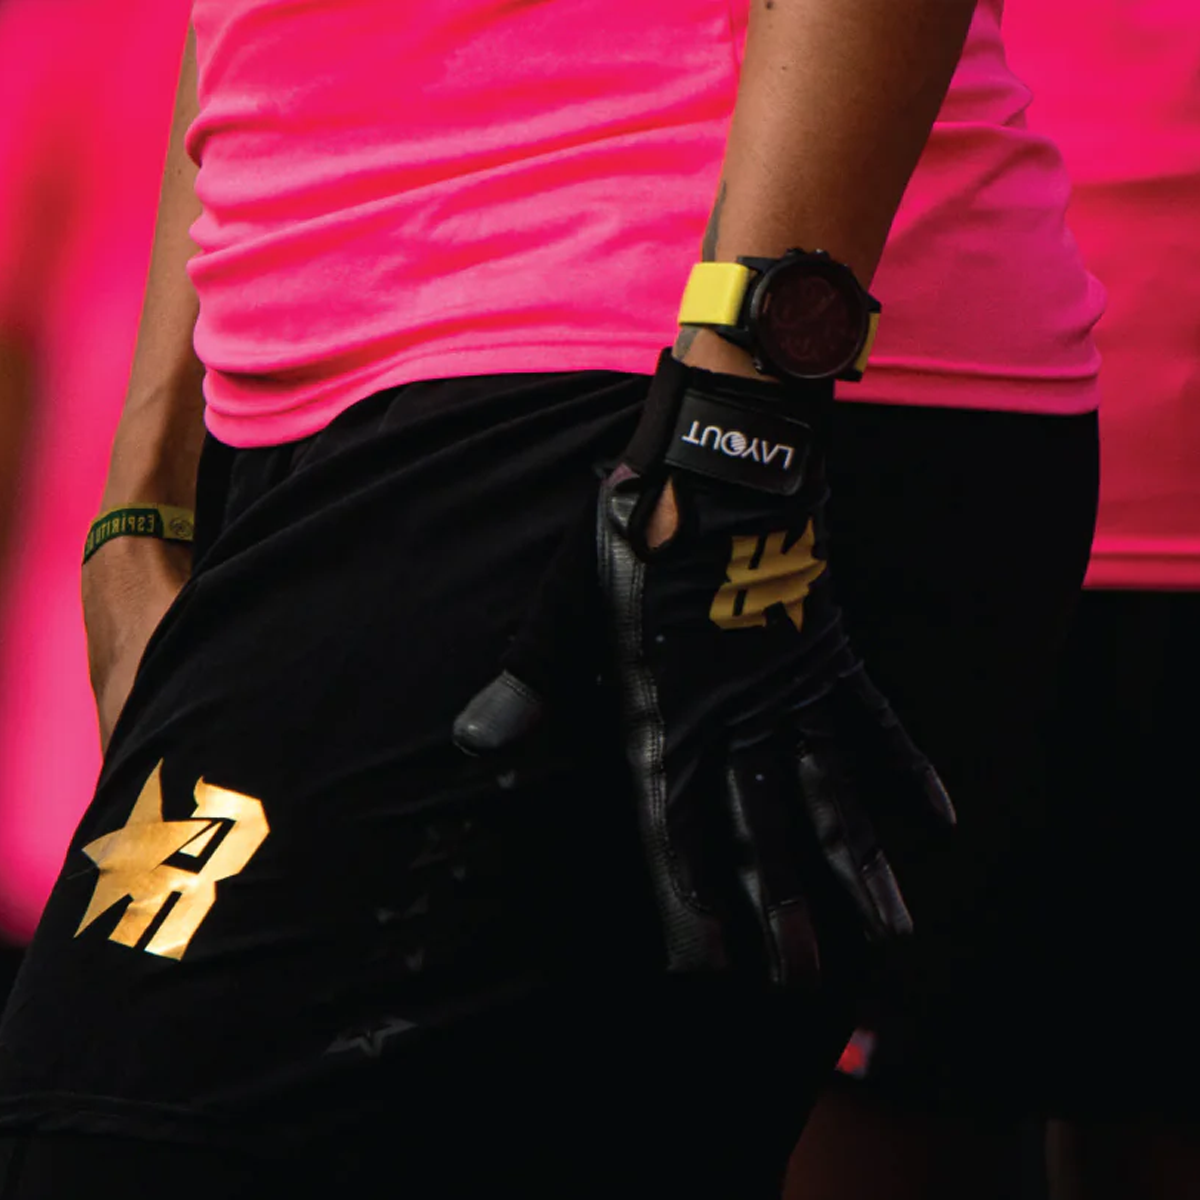 Layout Ultimate Gloves - The Ultimate Grip For Your Frisbee Game